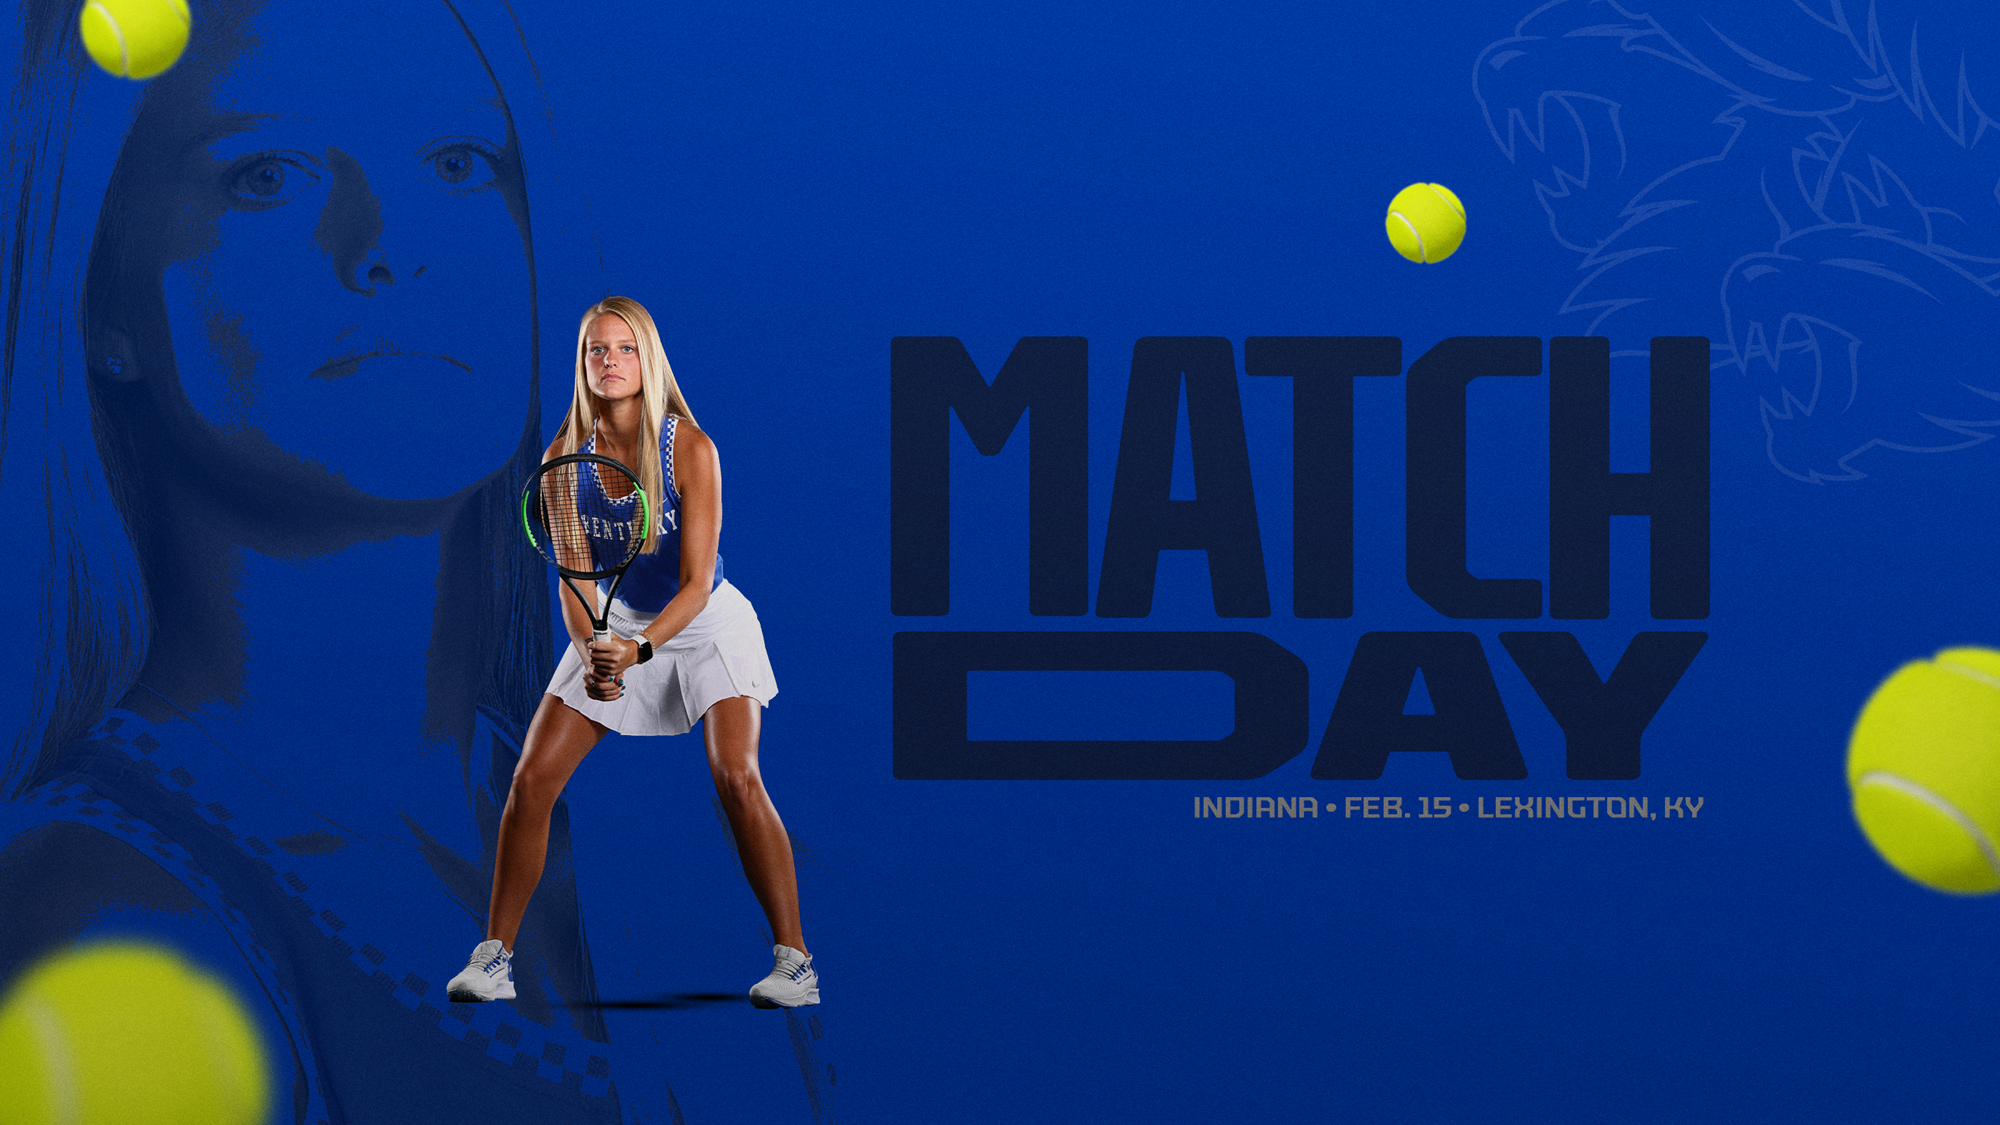 UK Women’s Tennis Continues Home Stretch on Tuesday Against Indiana